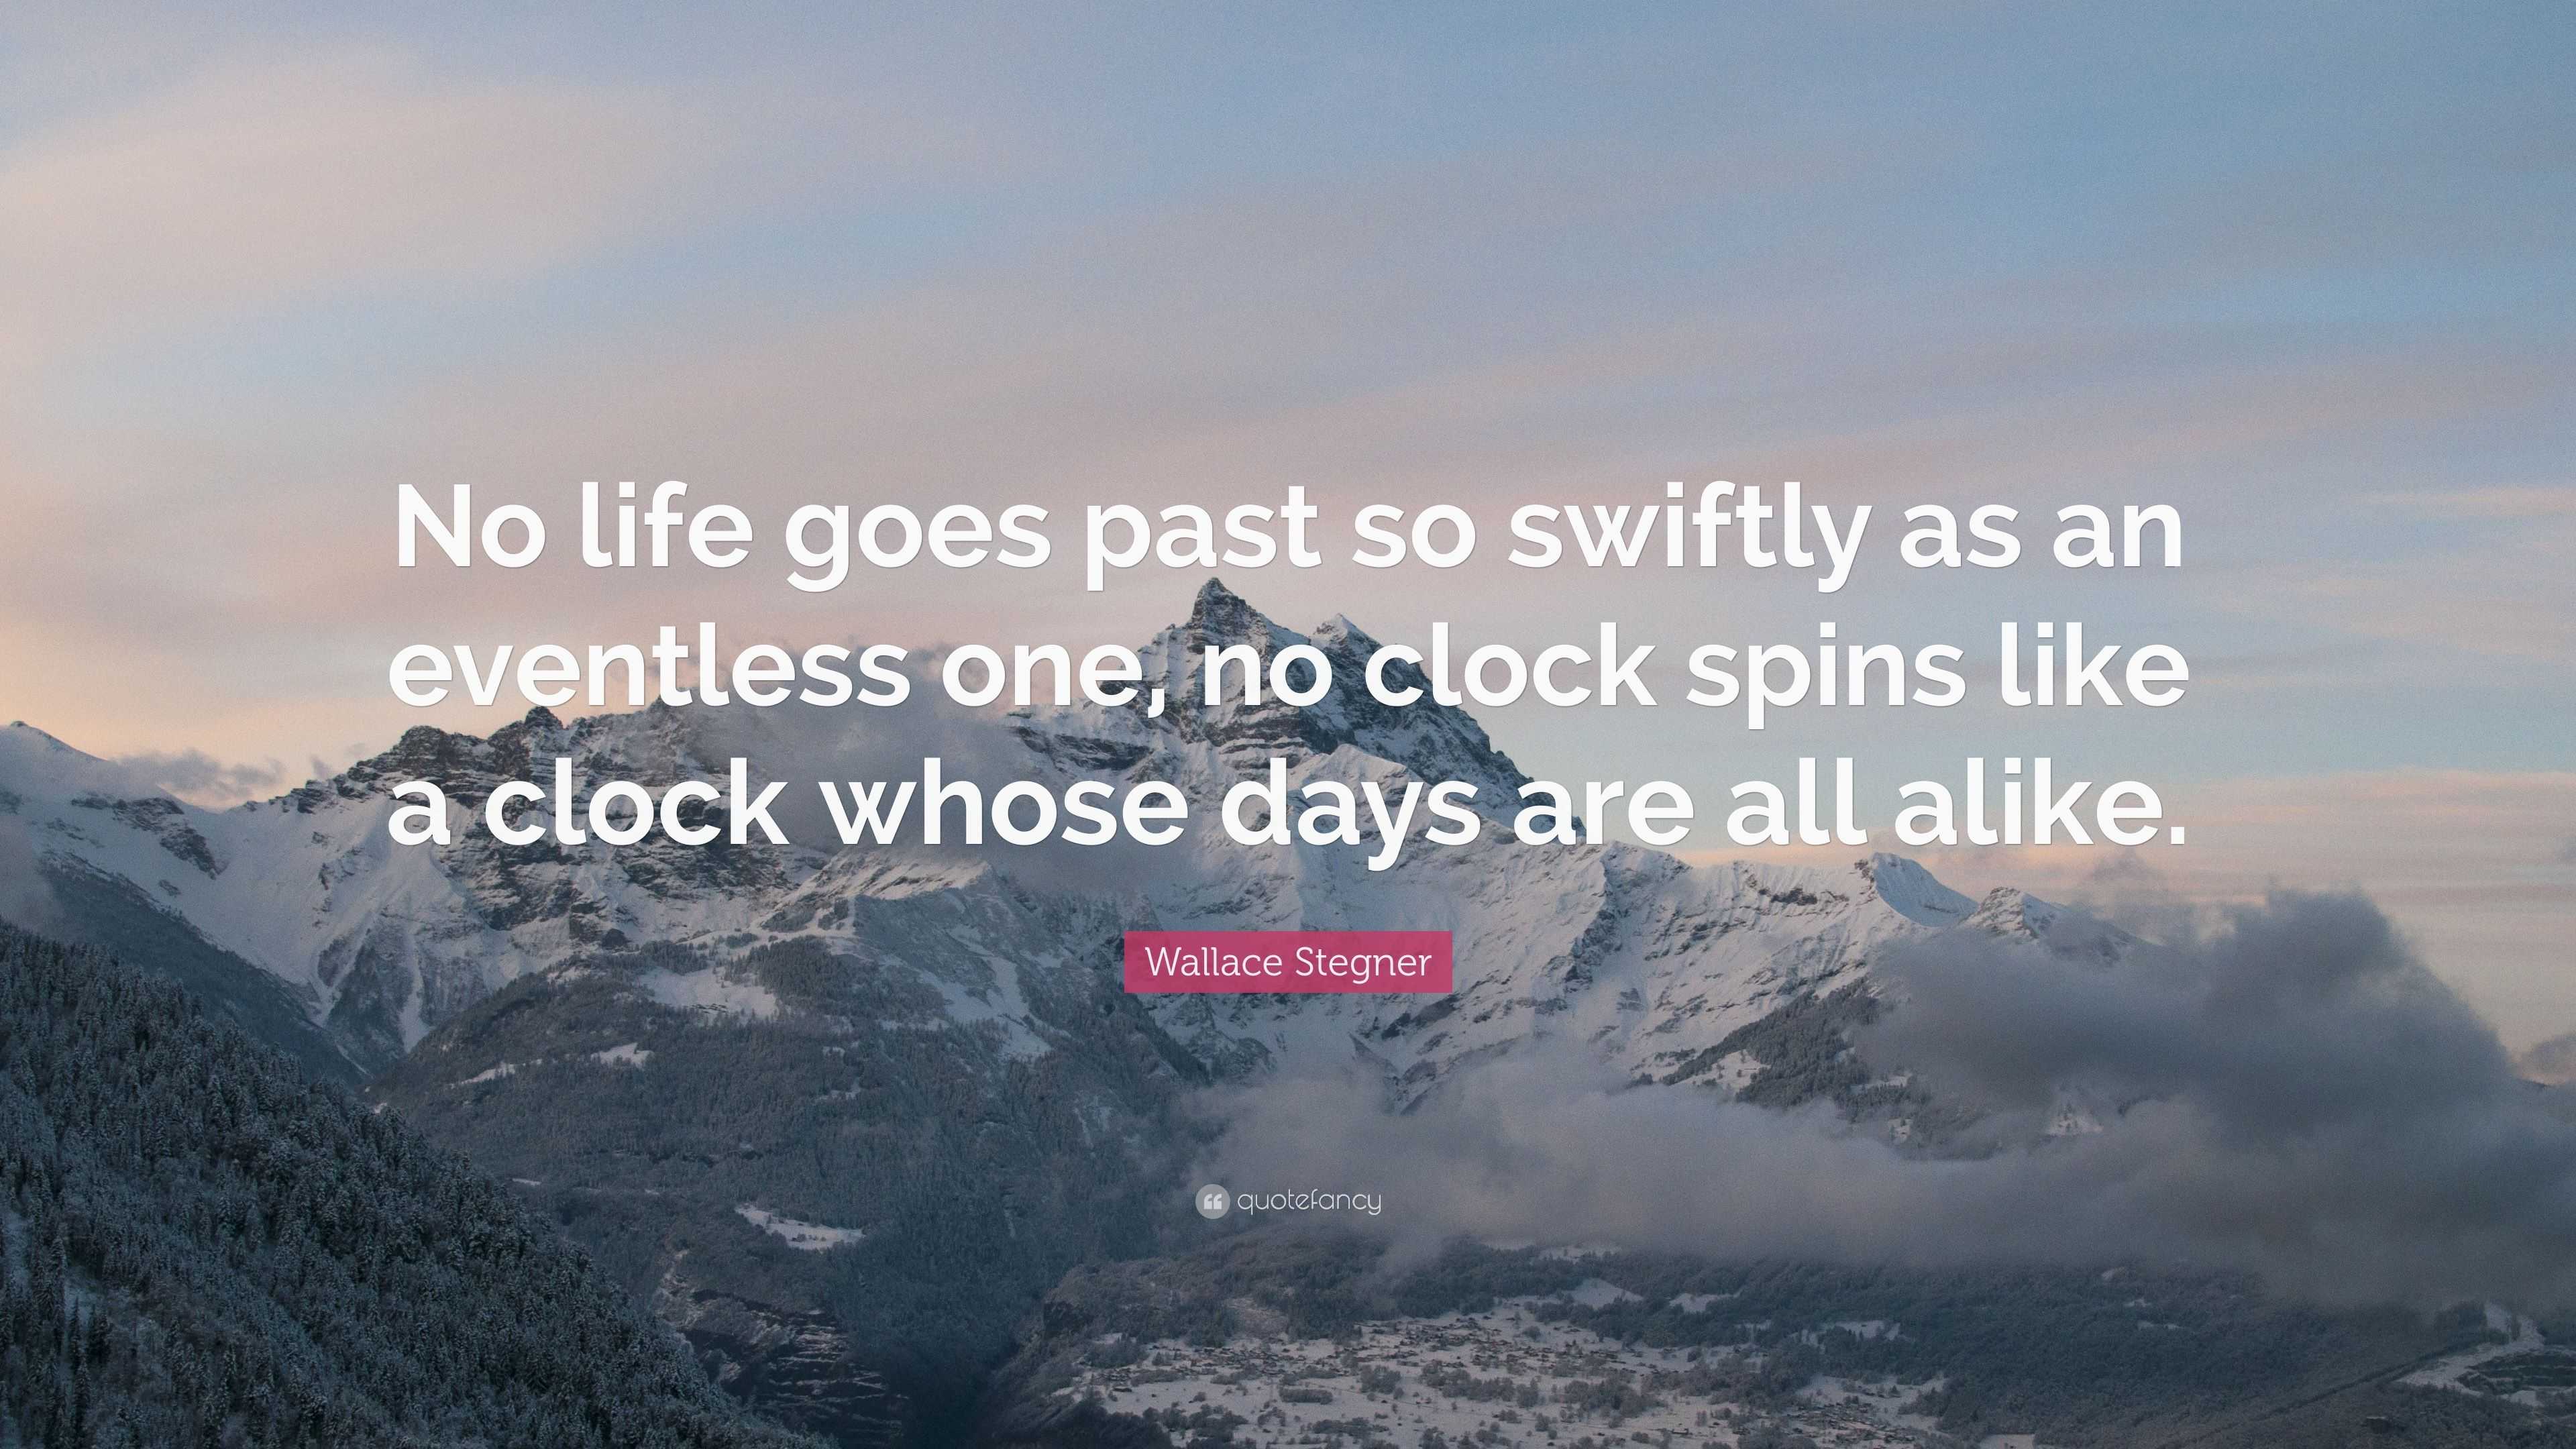 Wallace Stegner Quote “No life goes past so swiftly as an eventless one